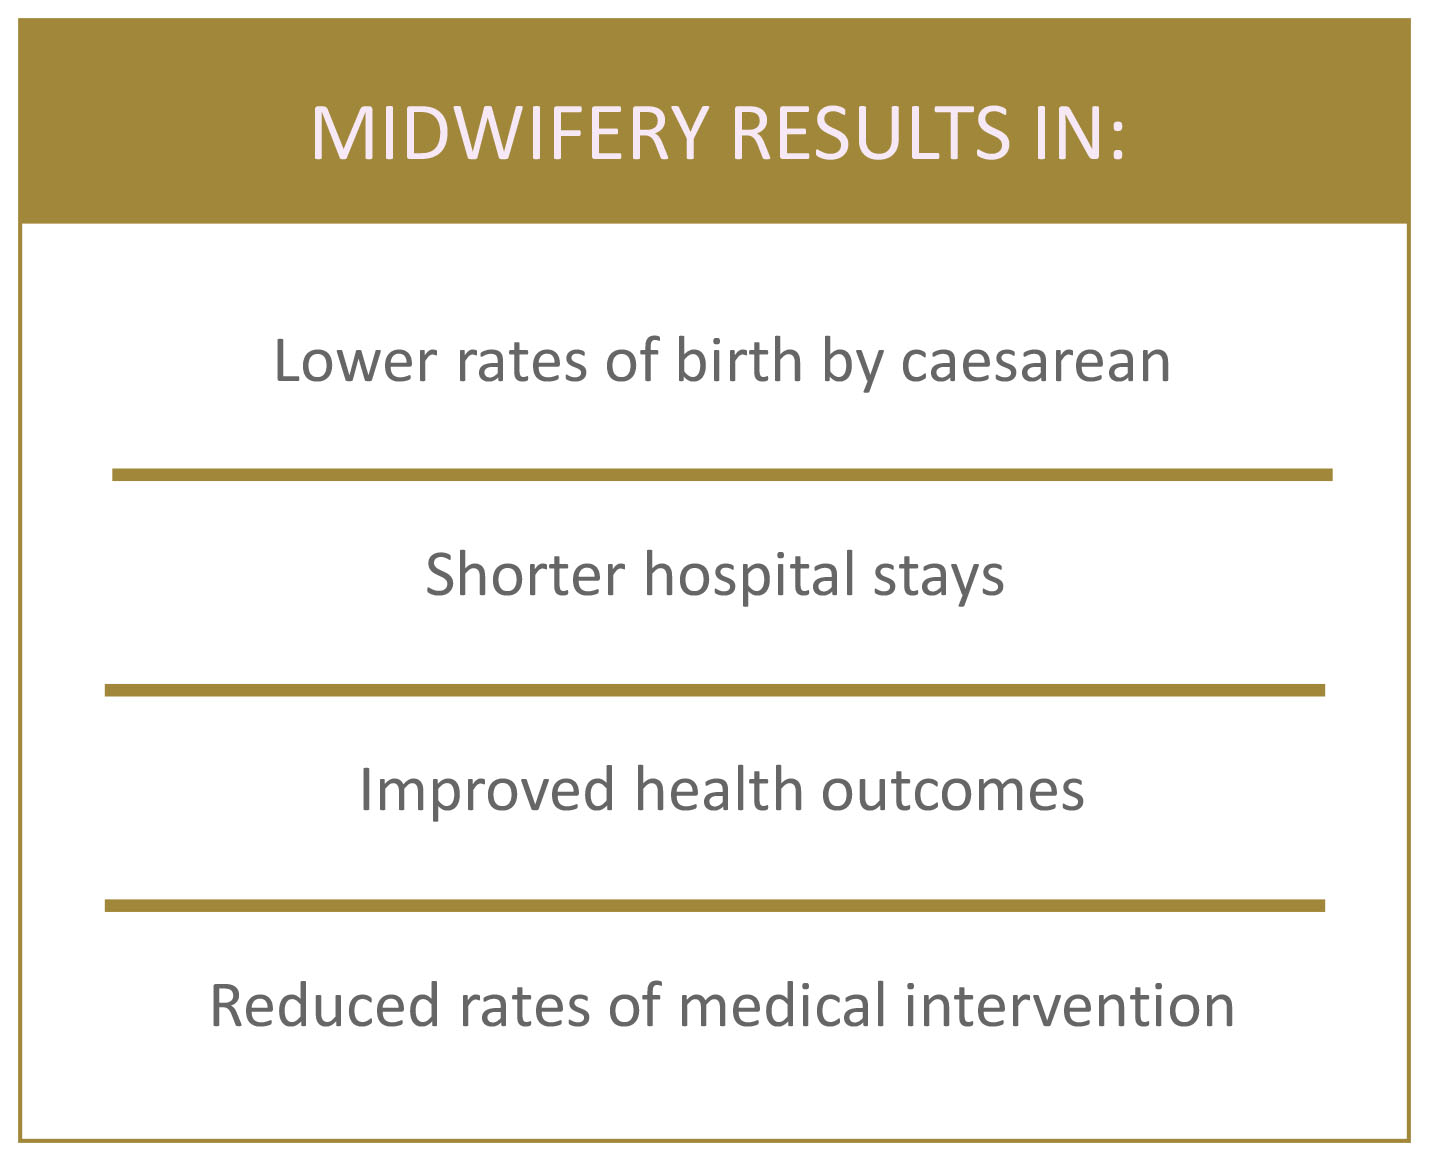 Midwives_results_-_2.jpg